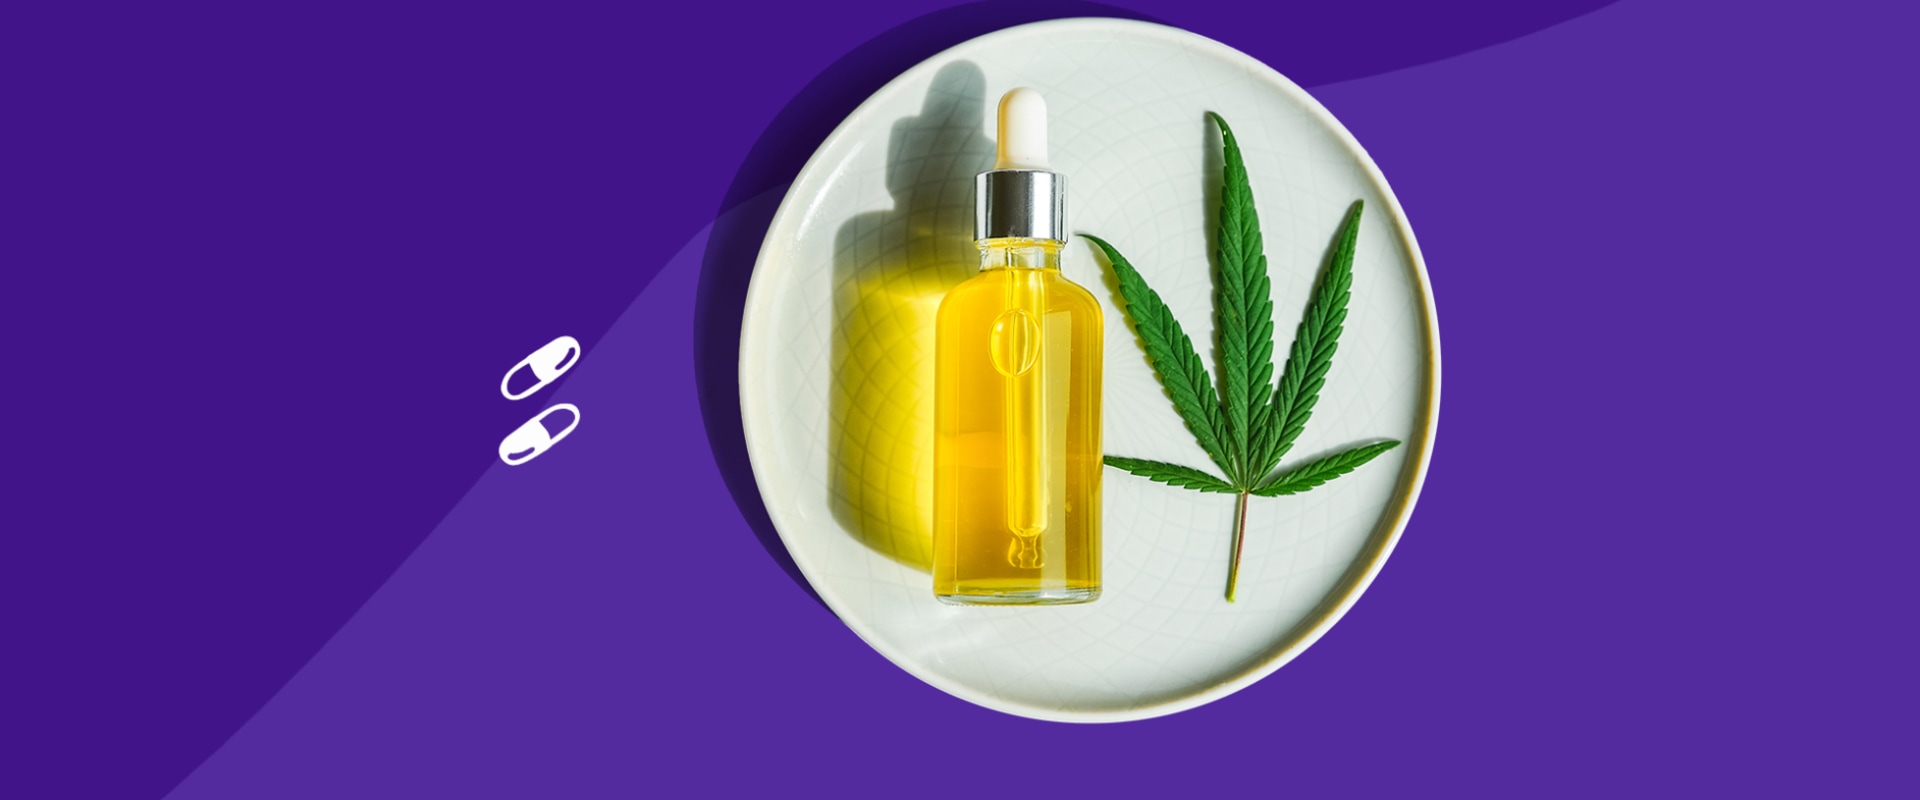 What Medications Should Not Be Taken with Hemp Oil?